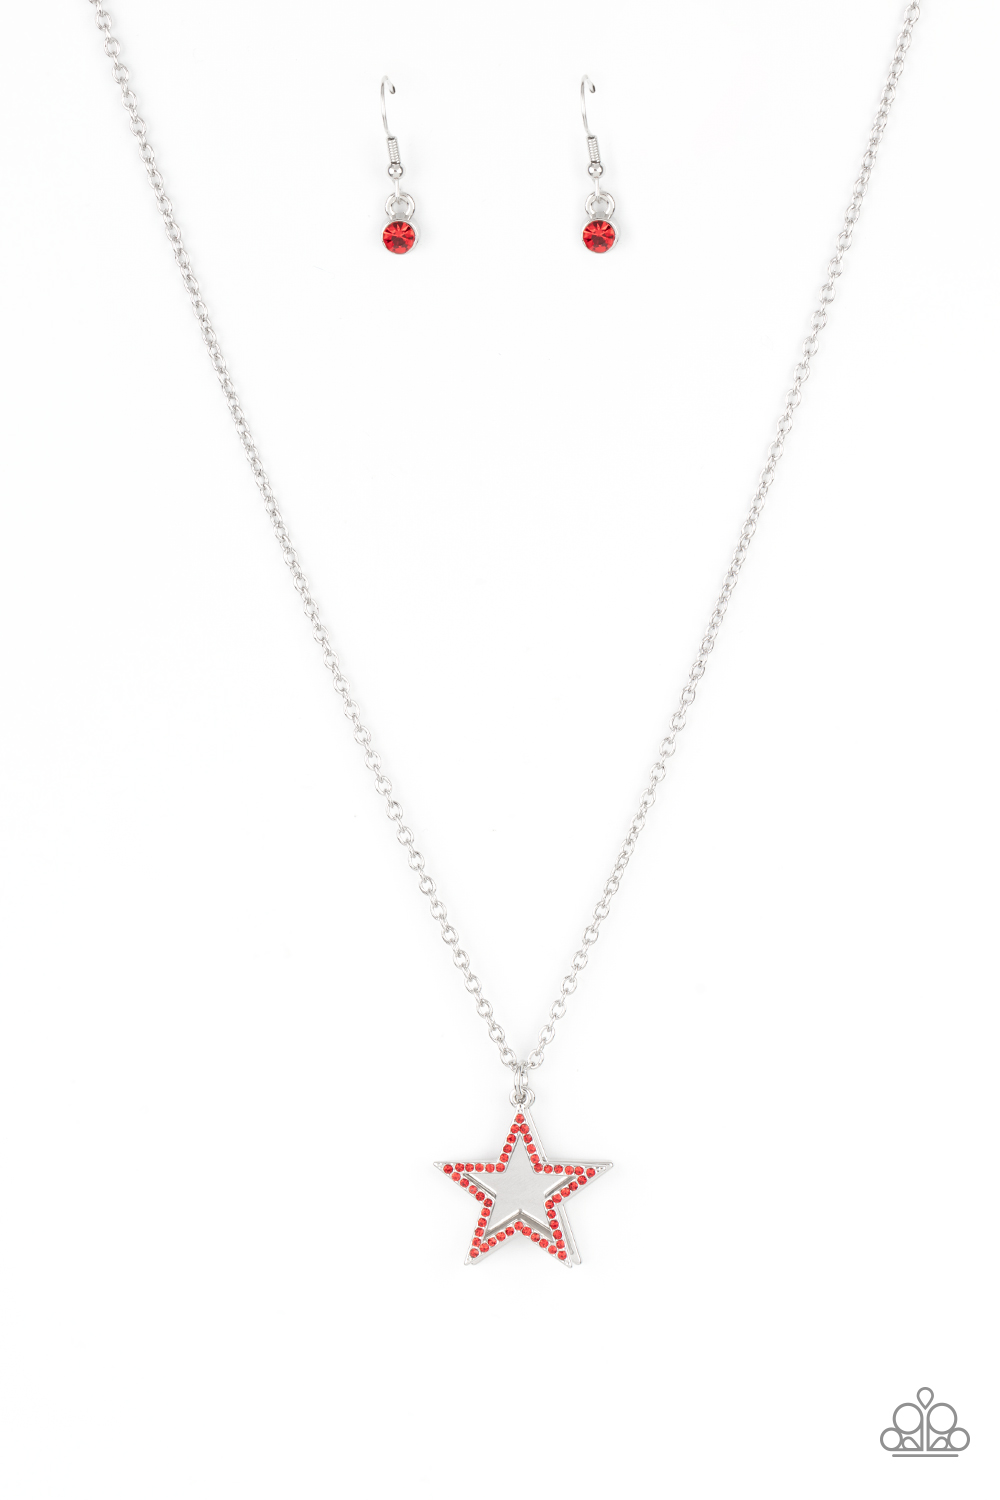 Necklace - American Anthem - Red